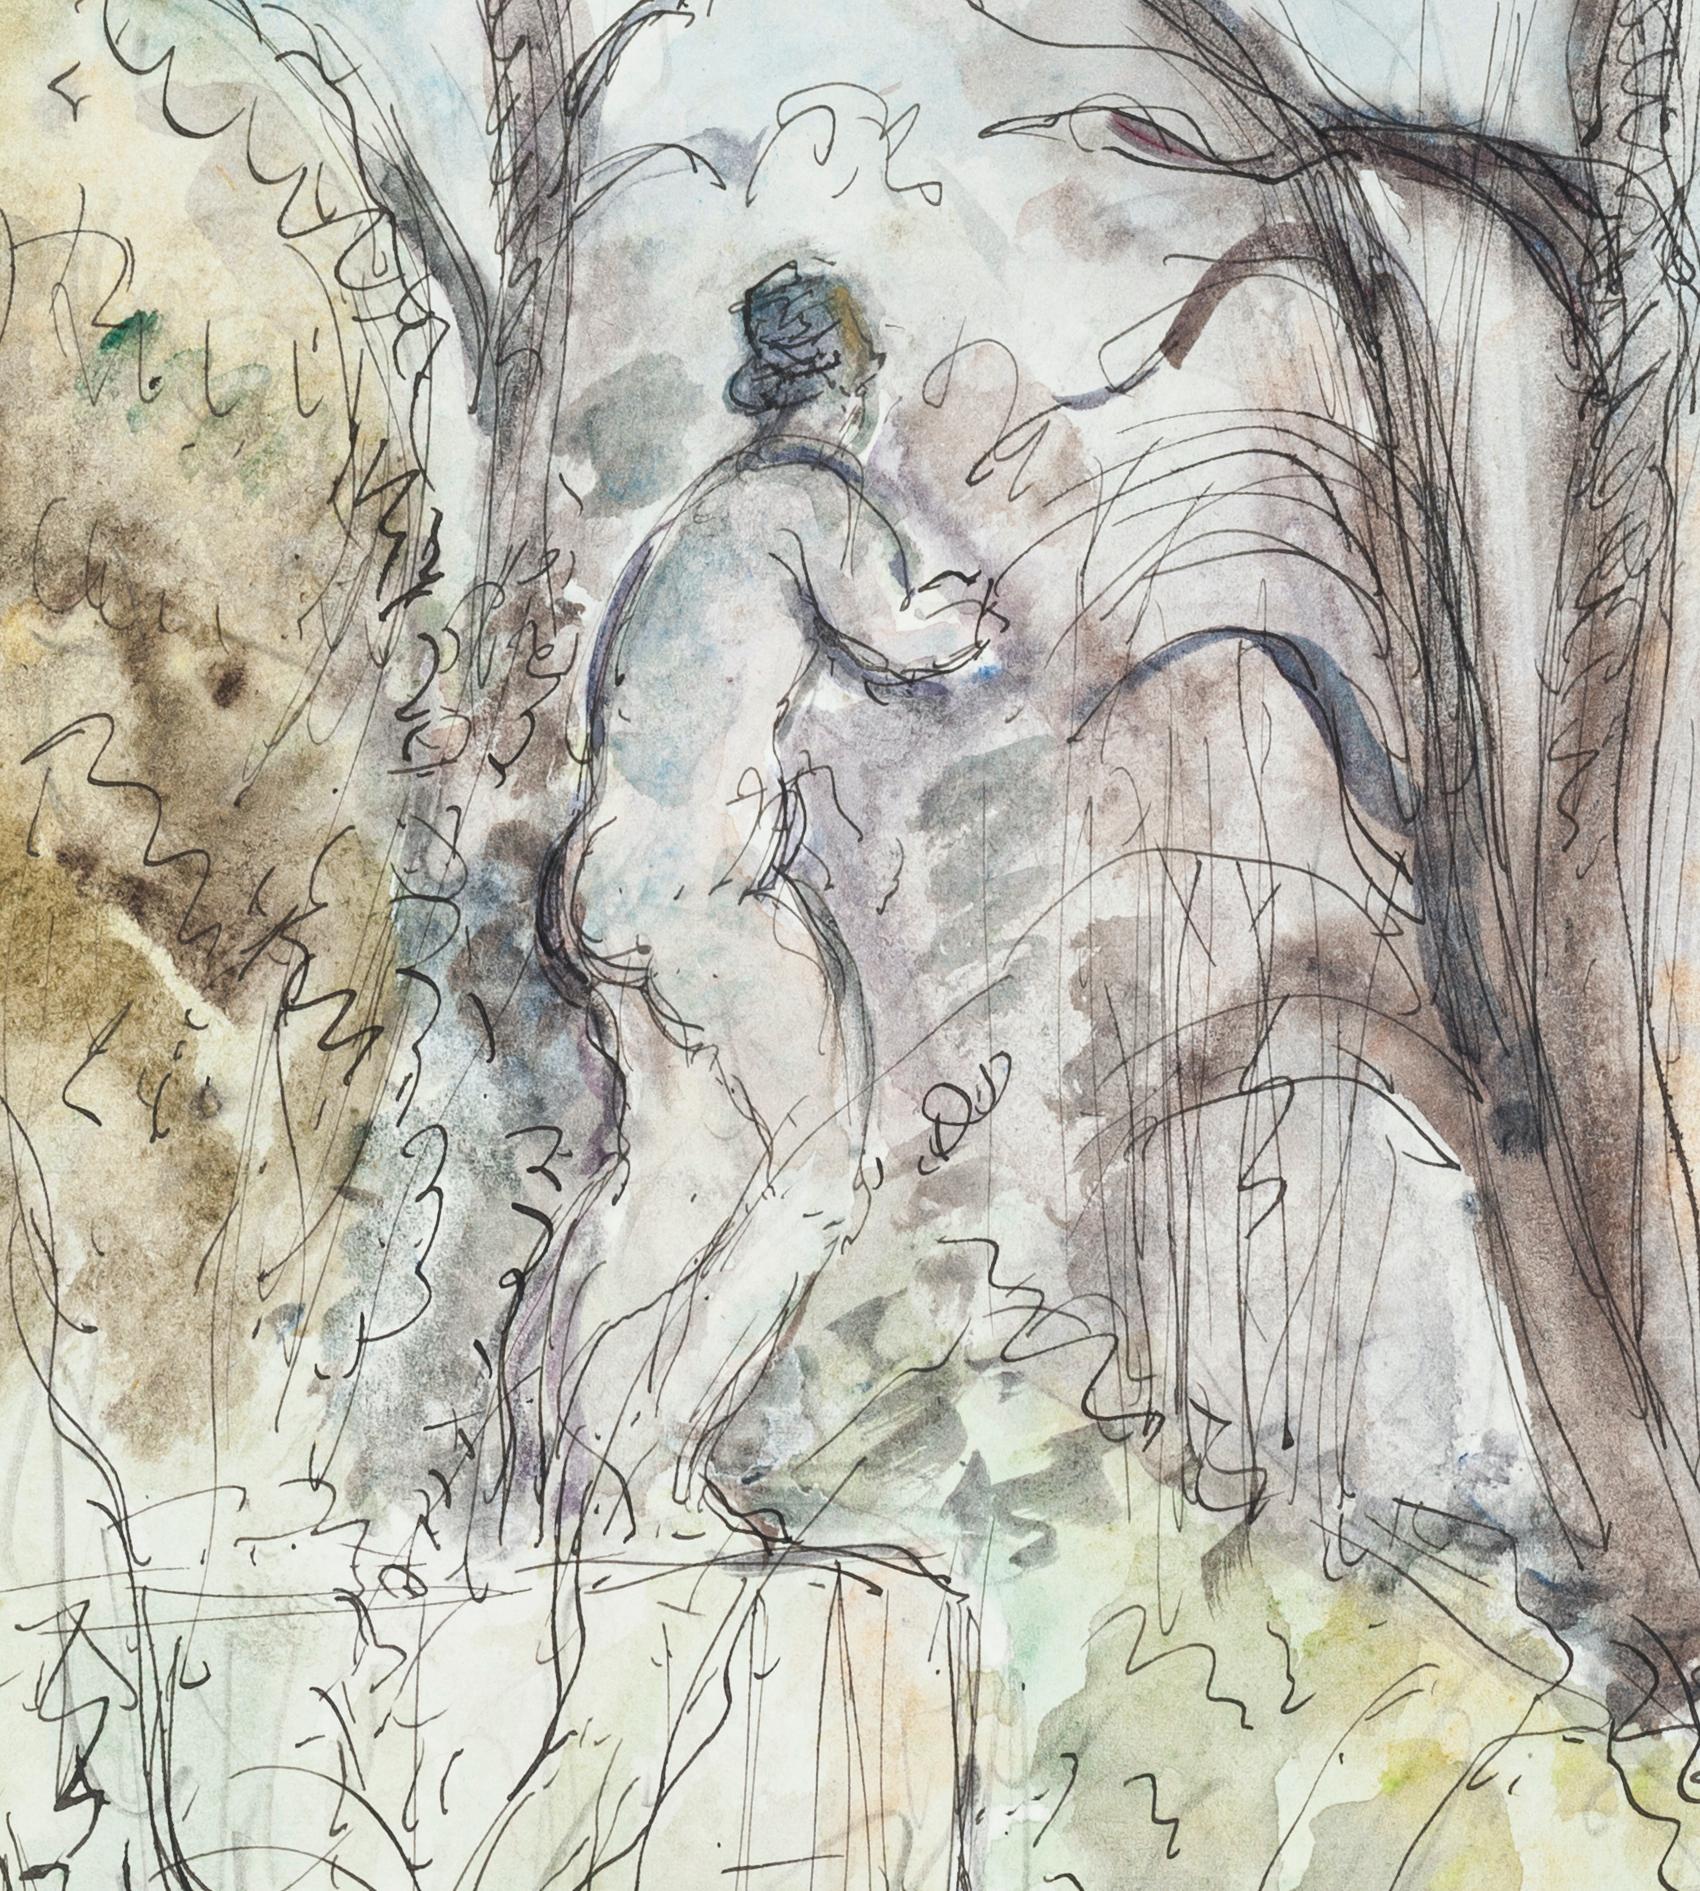 Alone in the Forest - Ink and Watercolor by S. Goldberg - 1950s - Art by Simon Goldberg